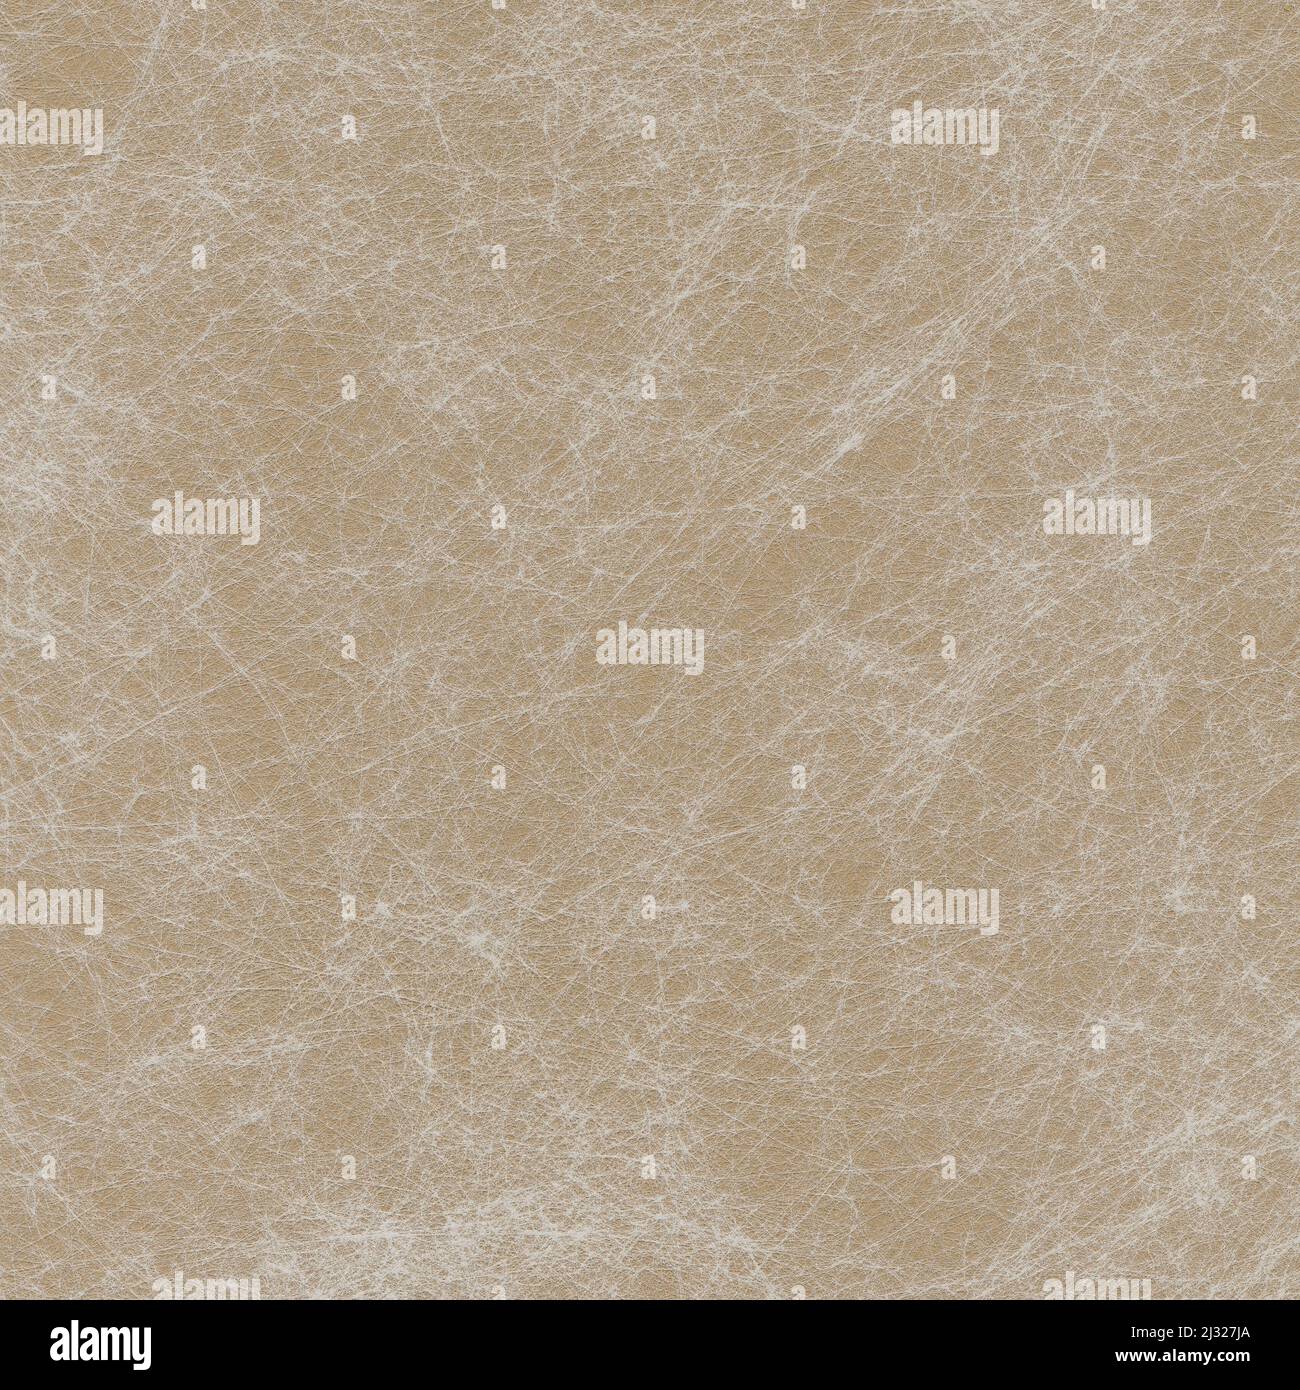 Beige paper background with white pattern Stock Photo